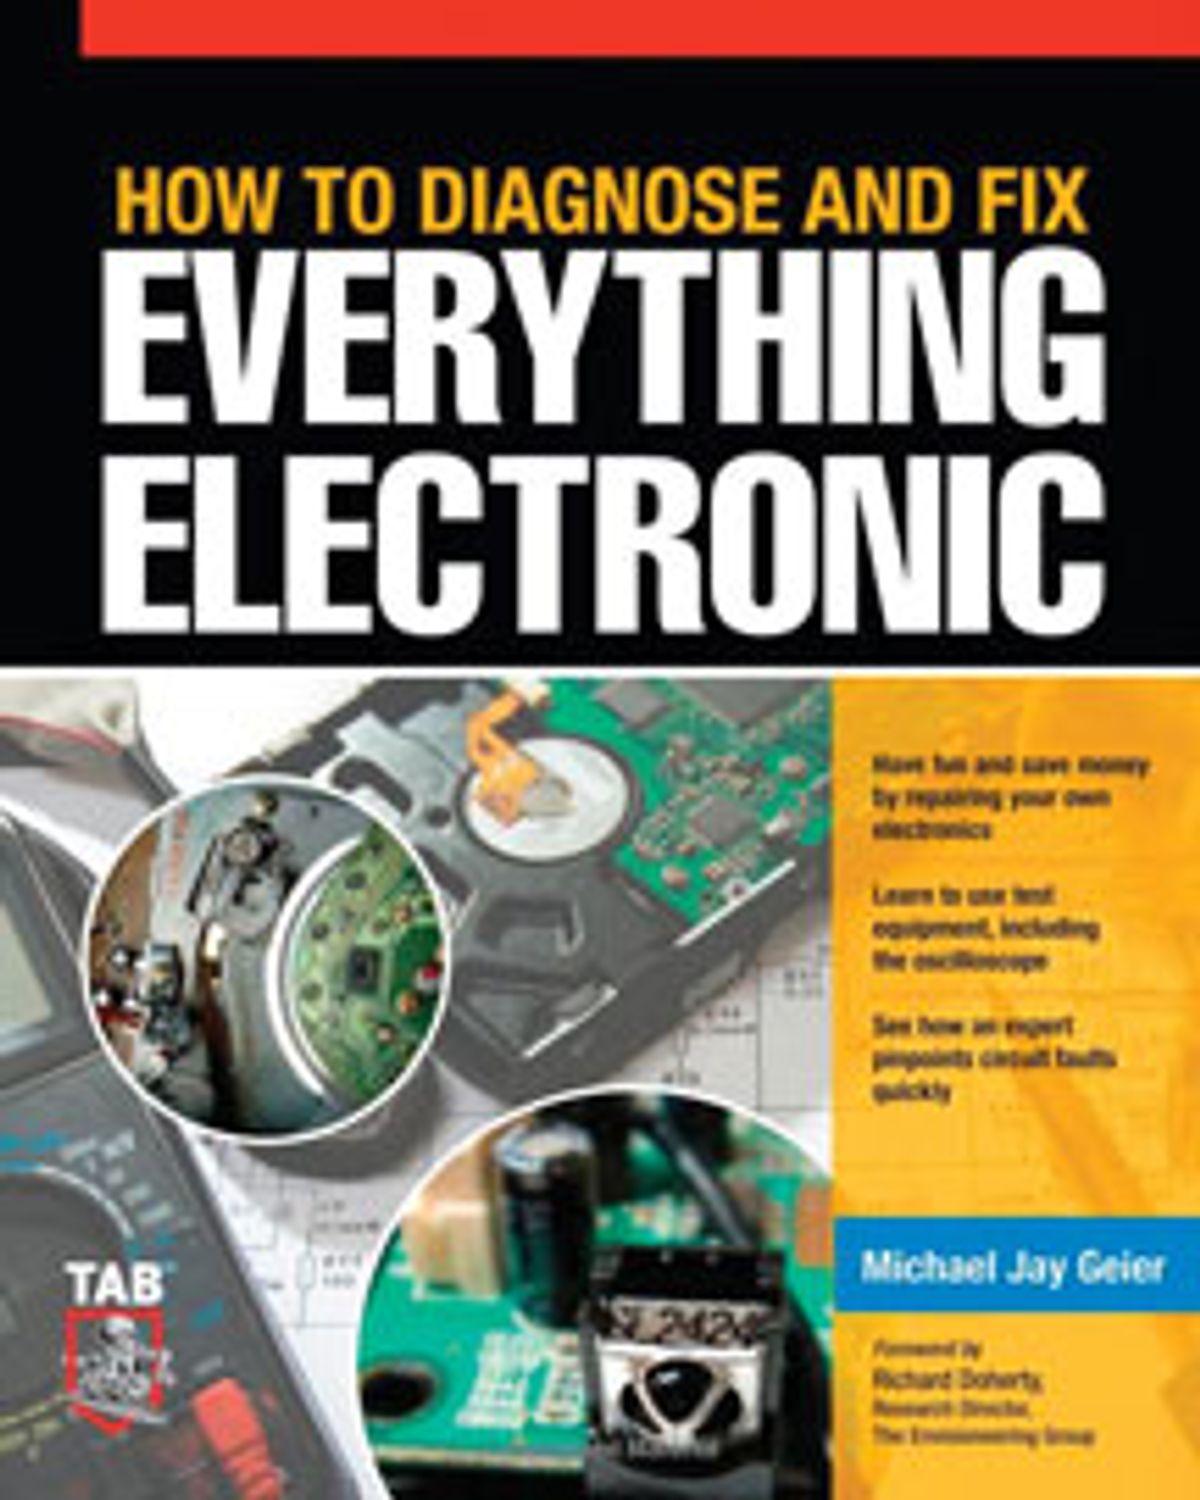 Book Review: How to Diagnose and Fix Everything Electronic